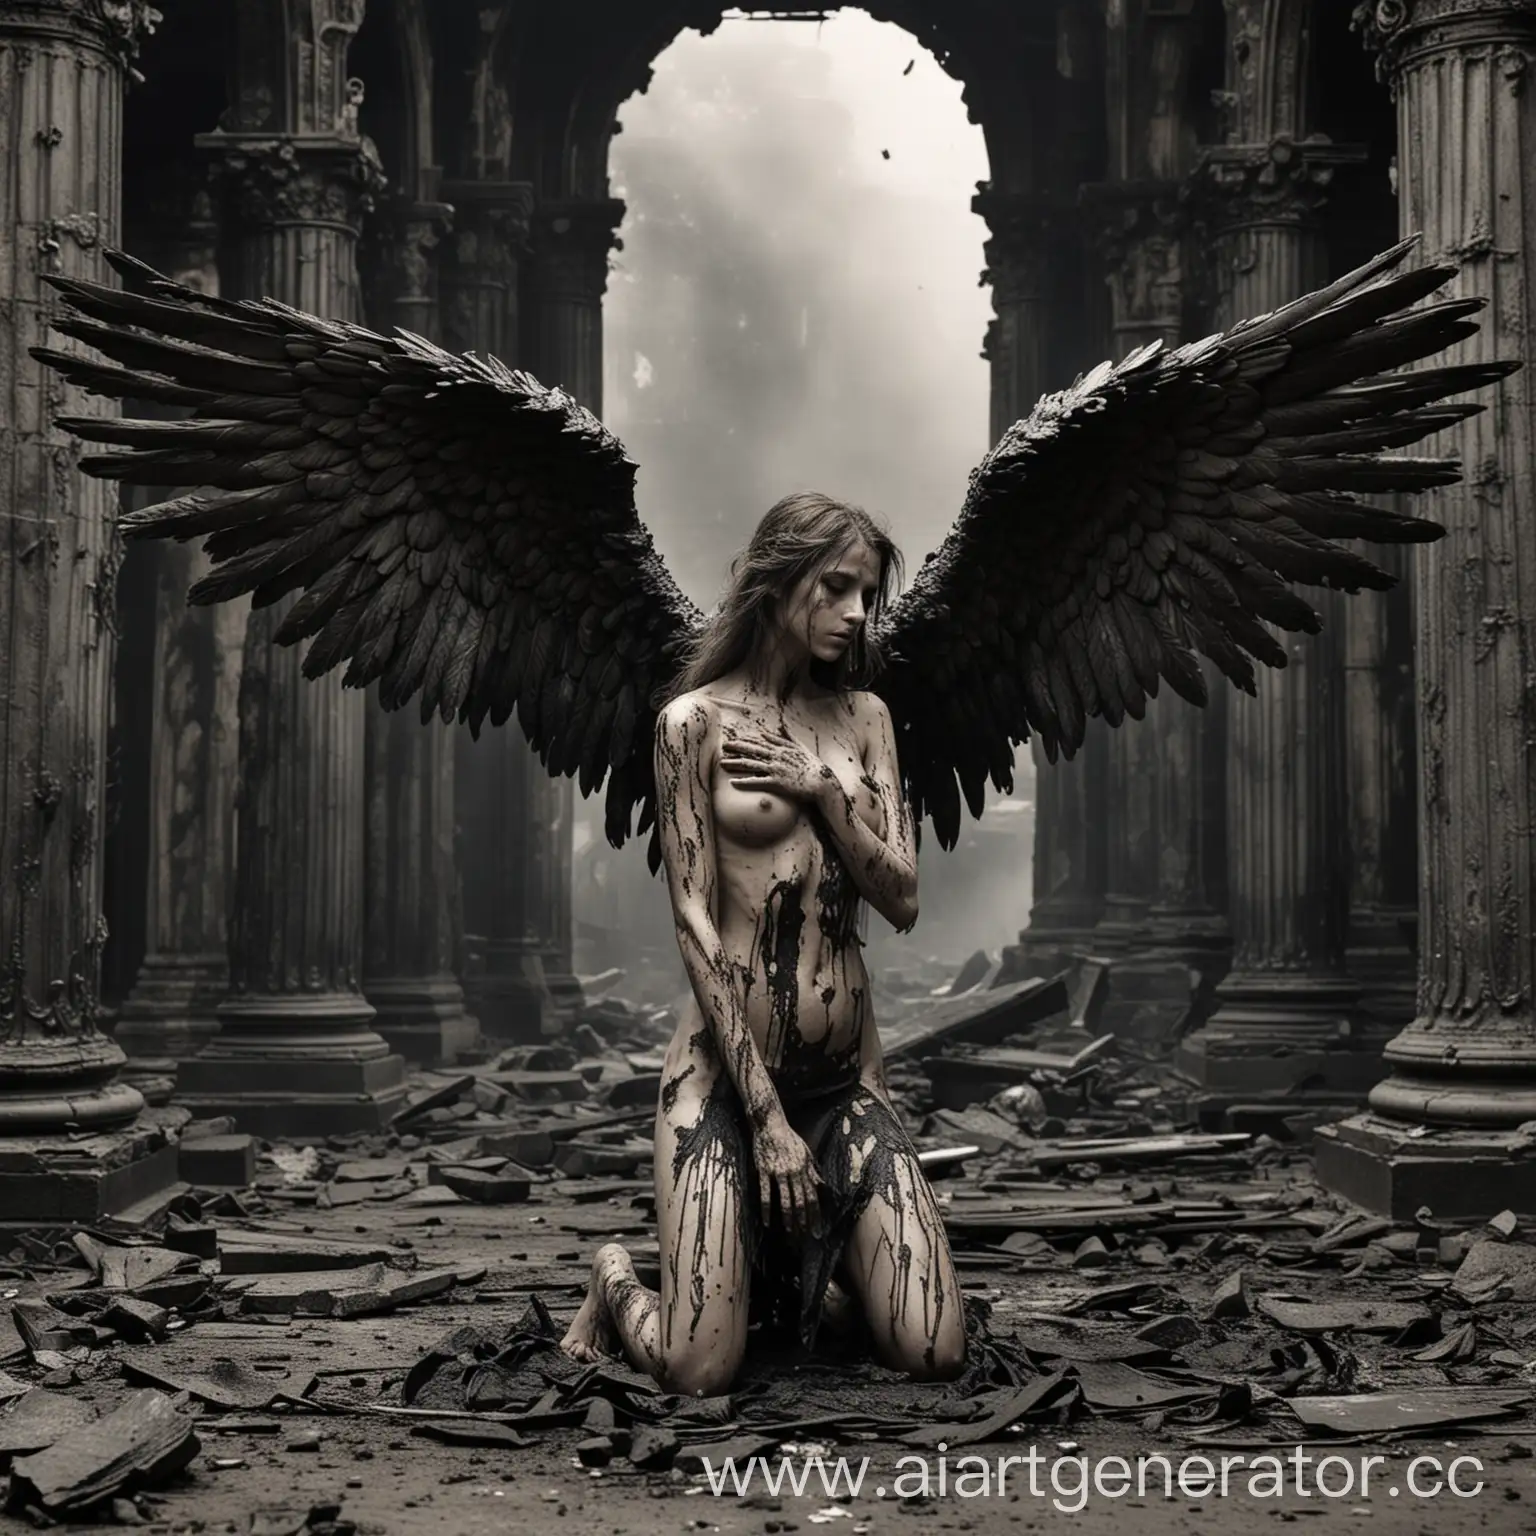 Fallen-Angel-Kneeling-Before-Temple-with-Disheveled-Wings-and-Charred-Arm